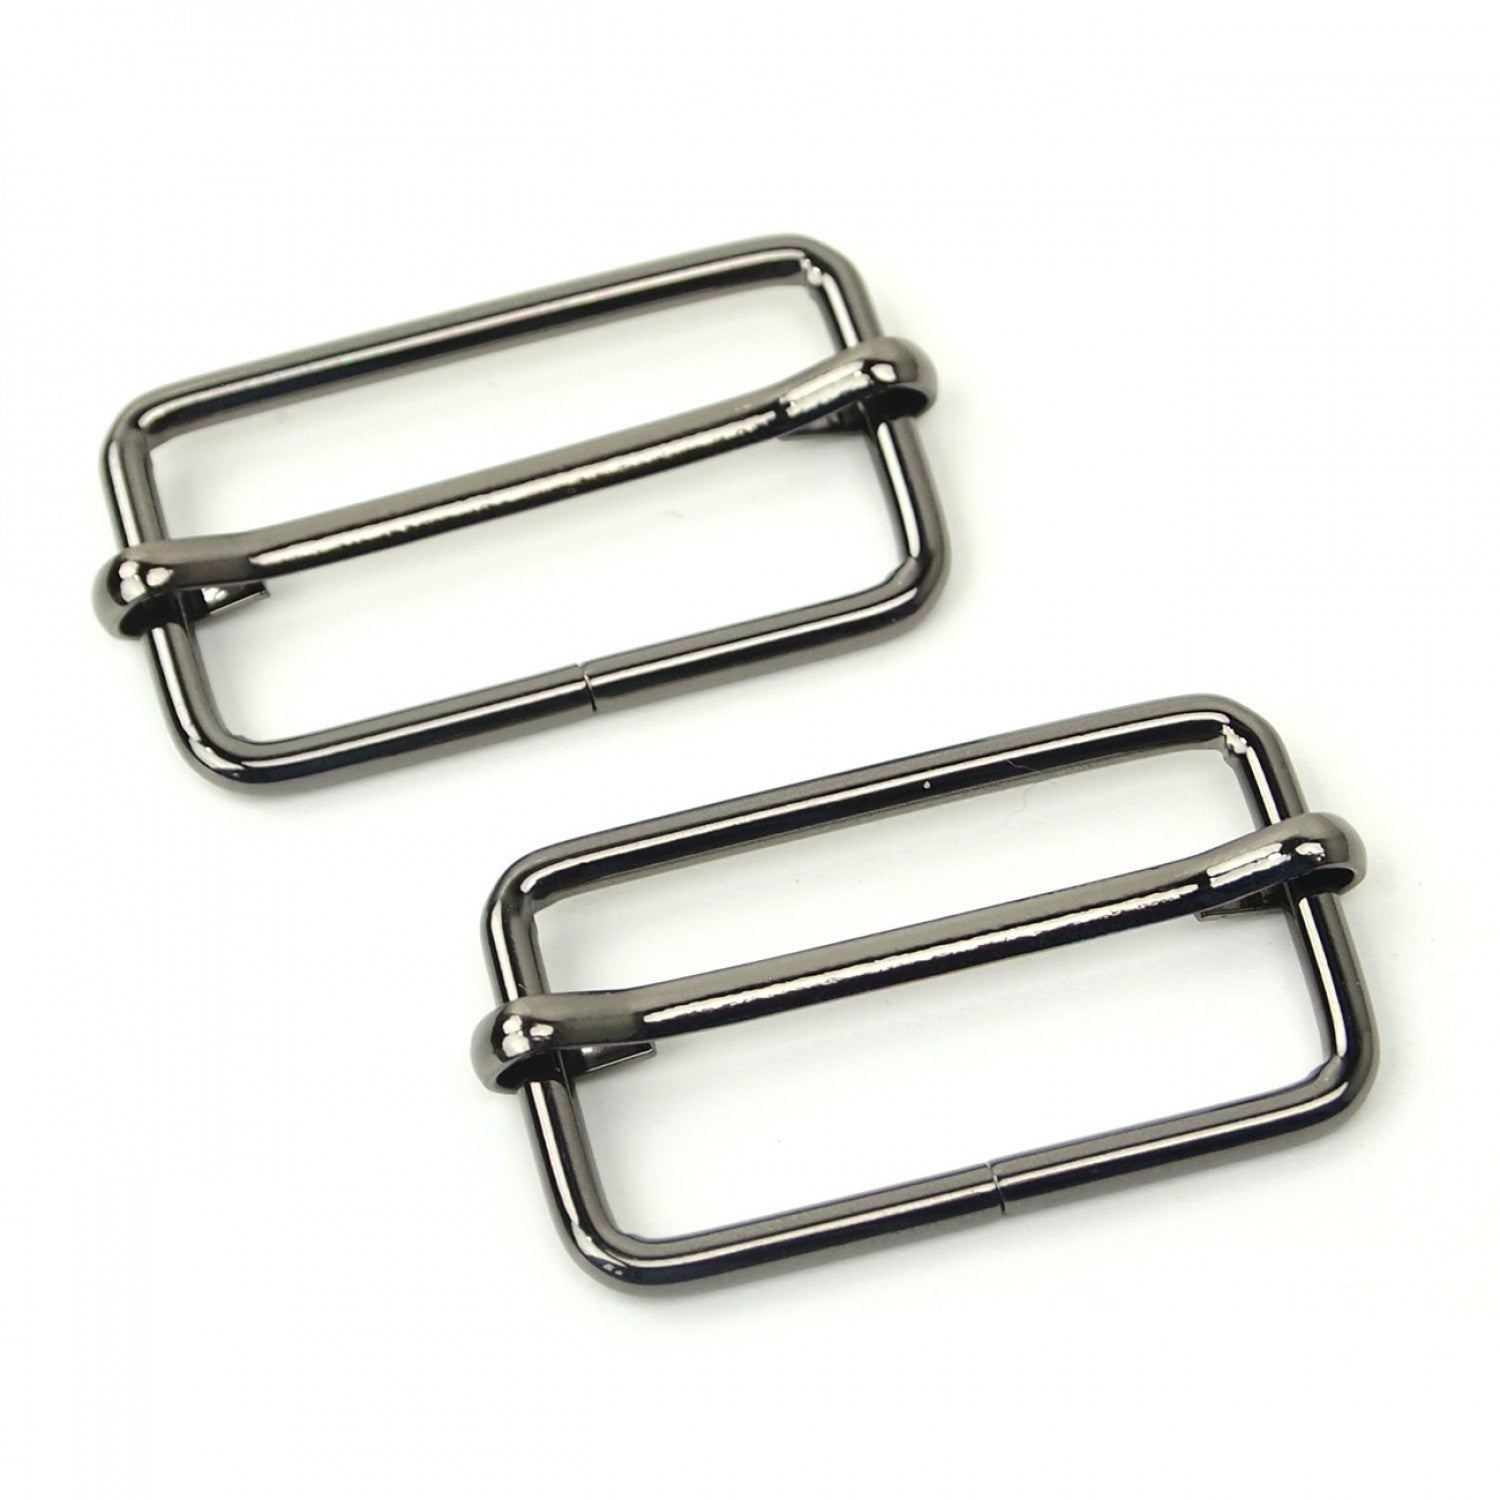 Find the Adjustable Slide Buckles By Loops & Threads® at Michaels